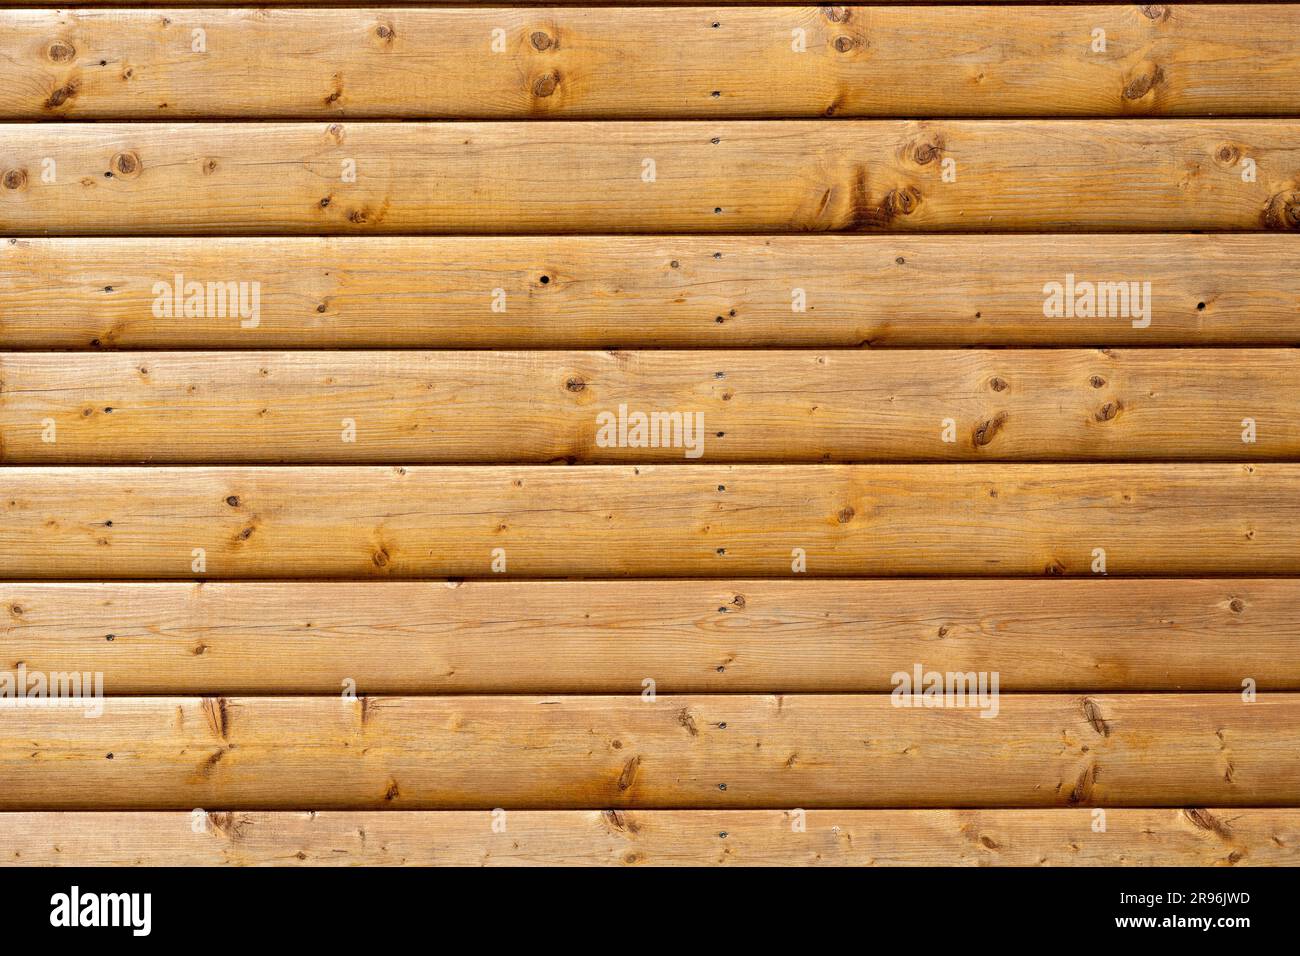 Background made of a wall of painted wooden boards Stock Photo